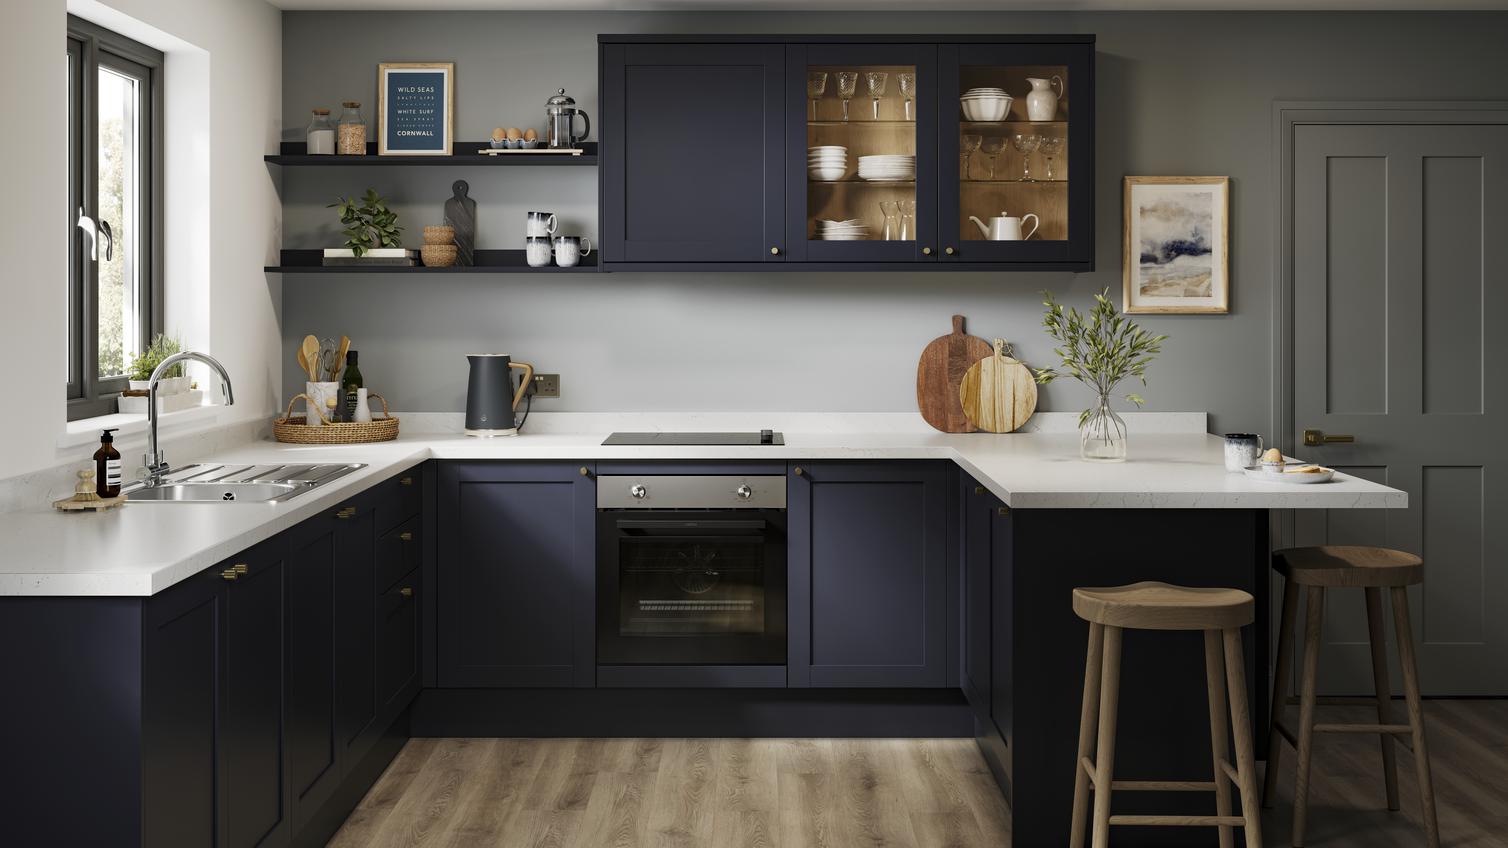 A U-shaped kitchen layout with navy, shaker doors. Includes white worktops, glass wall units, and a black, induction hob. 